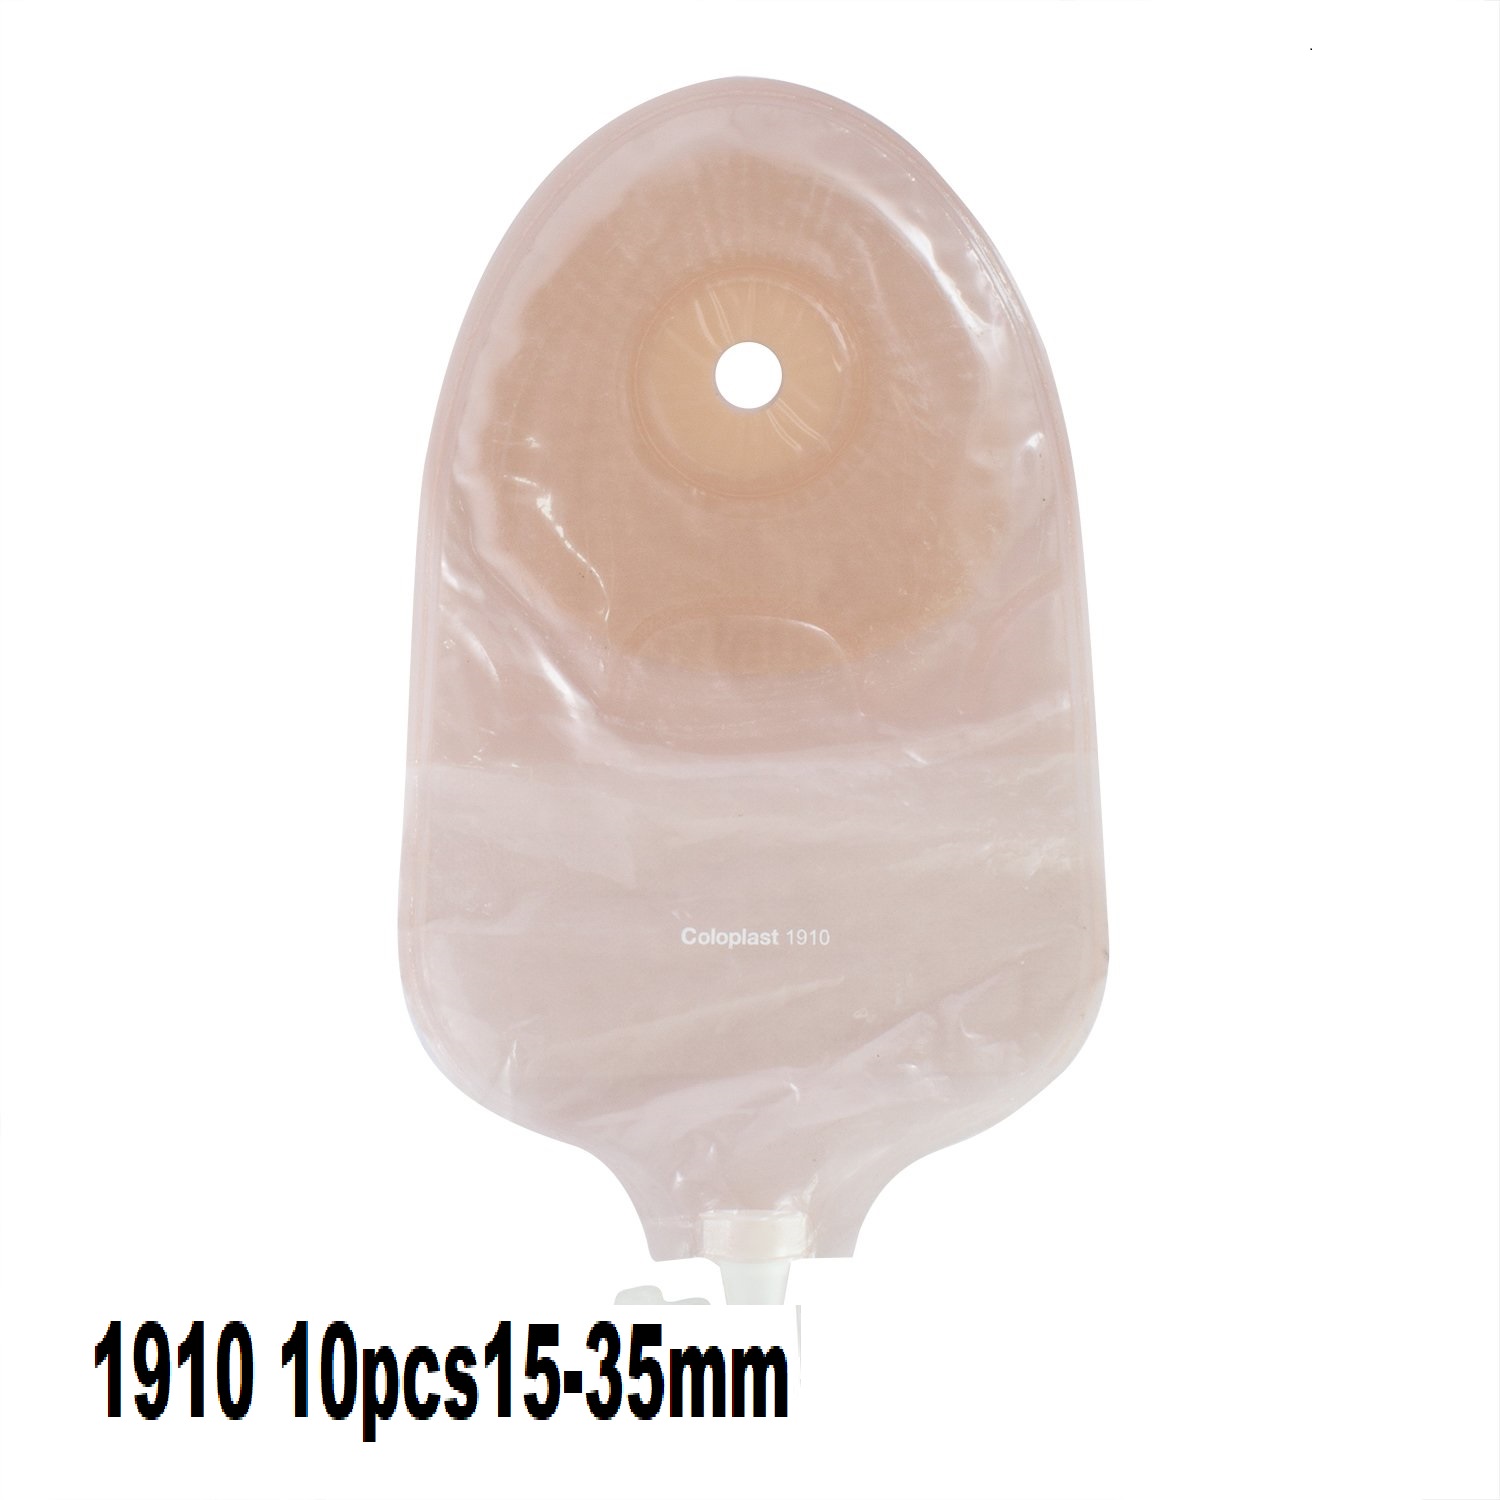 Coloplast 1910 Lc Uro One-Piece Urostomy Bag Pack Of 10